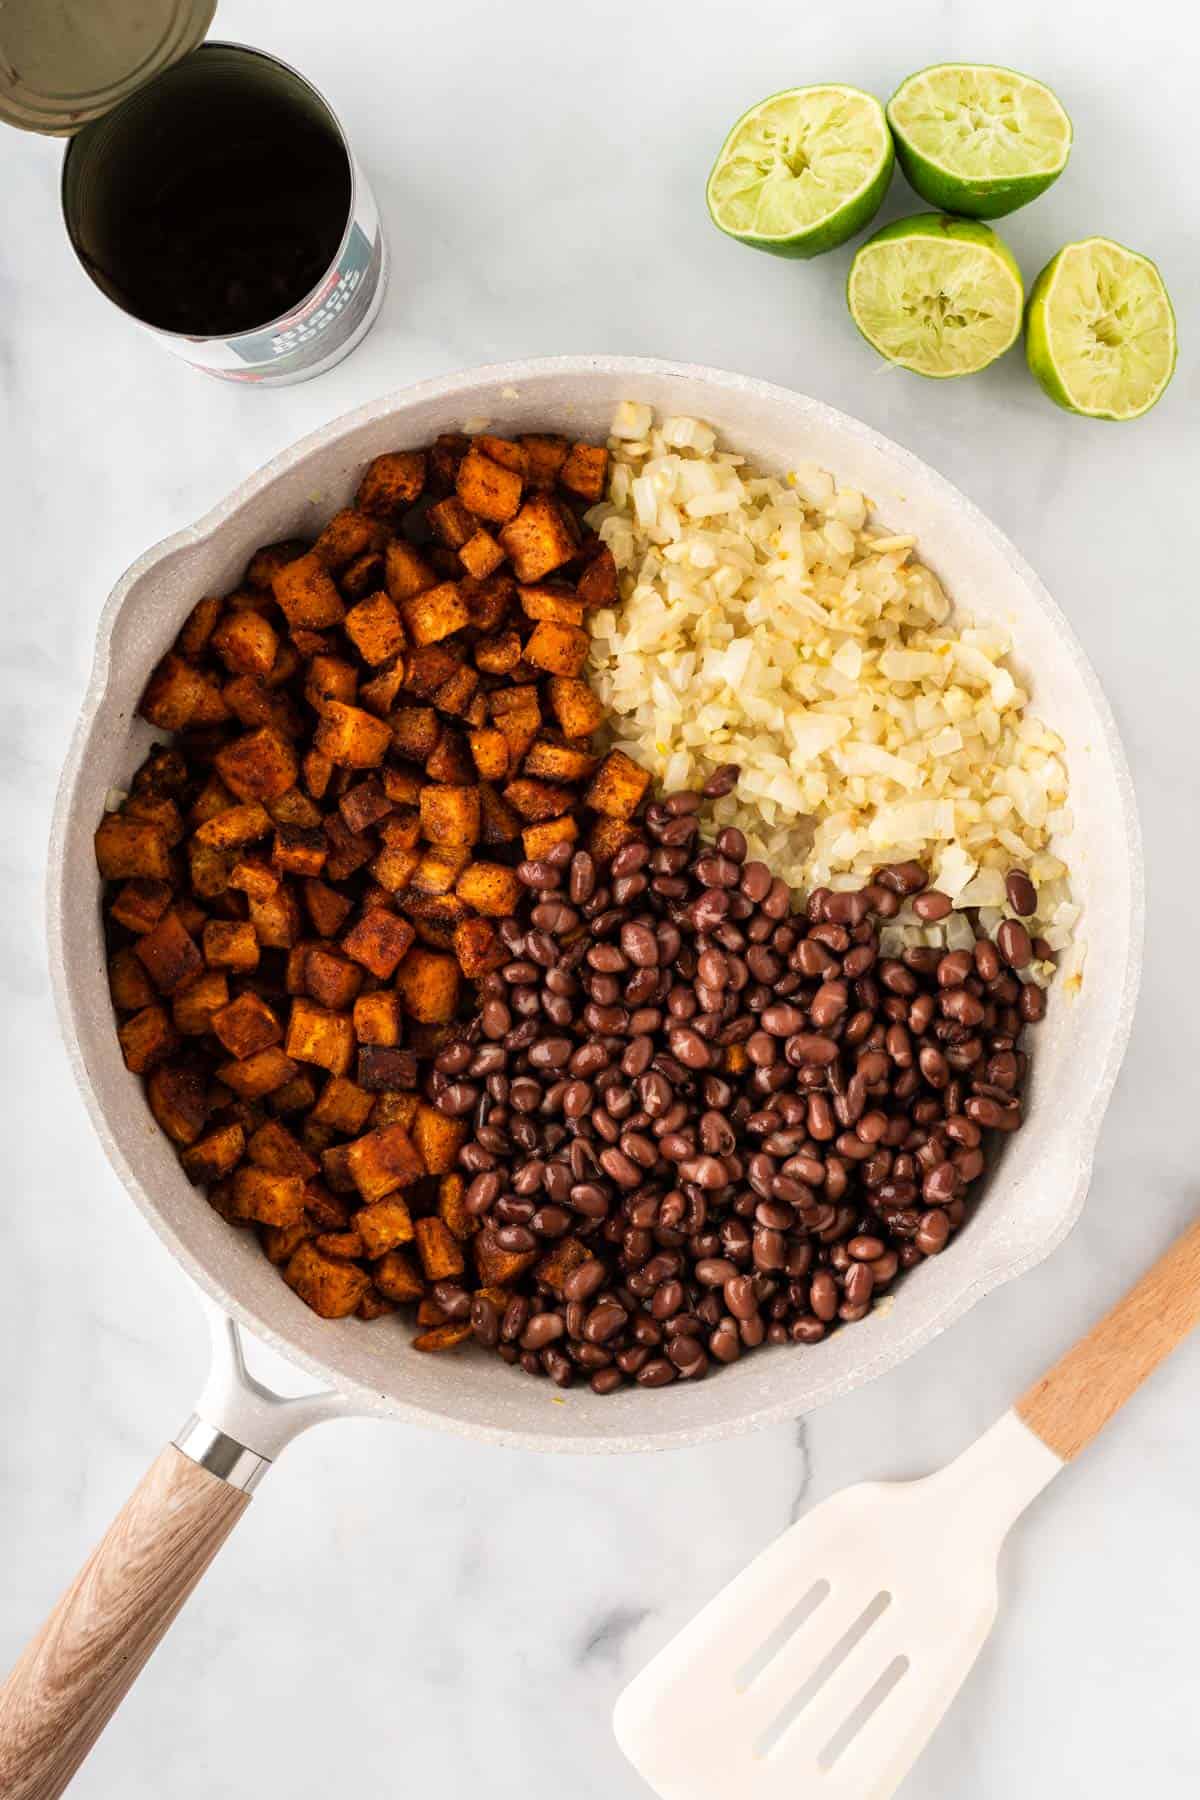 adding the sweet potatoes and black beans to the skillet